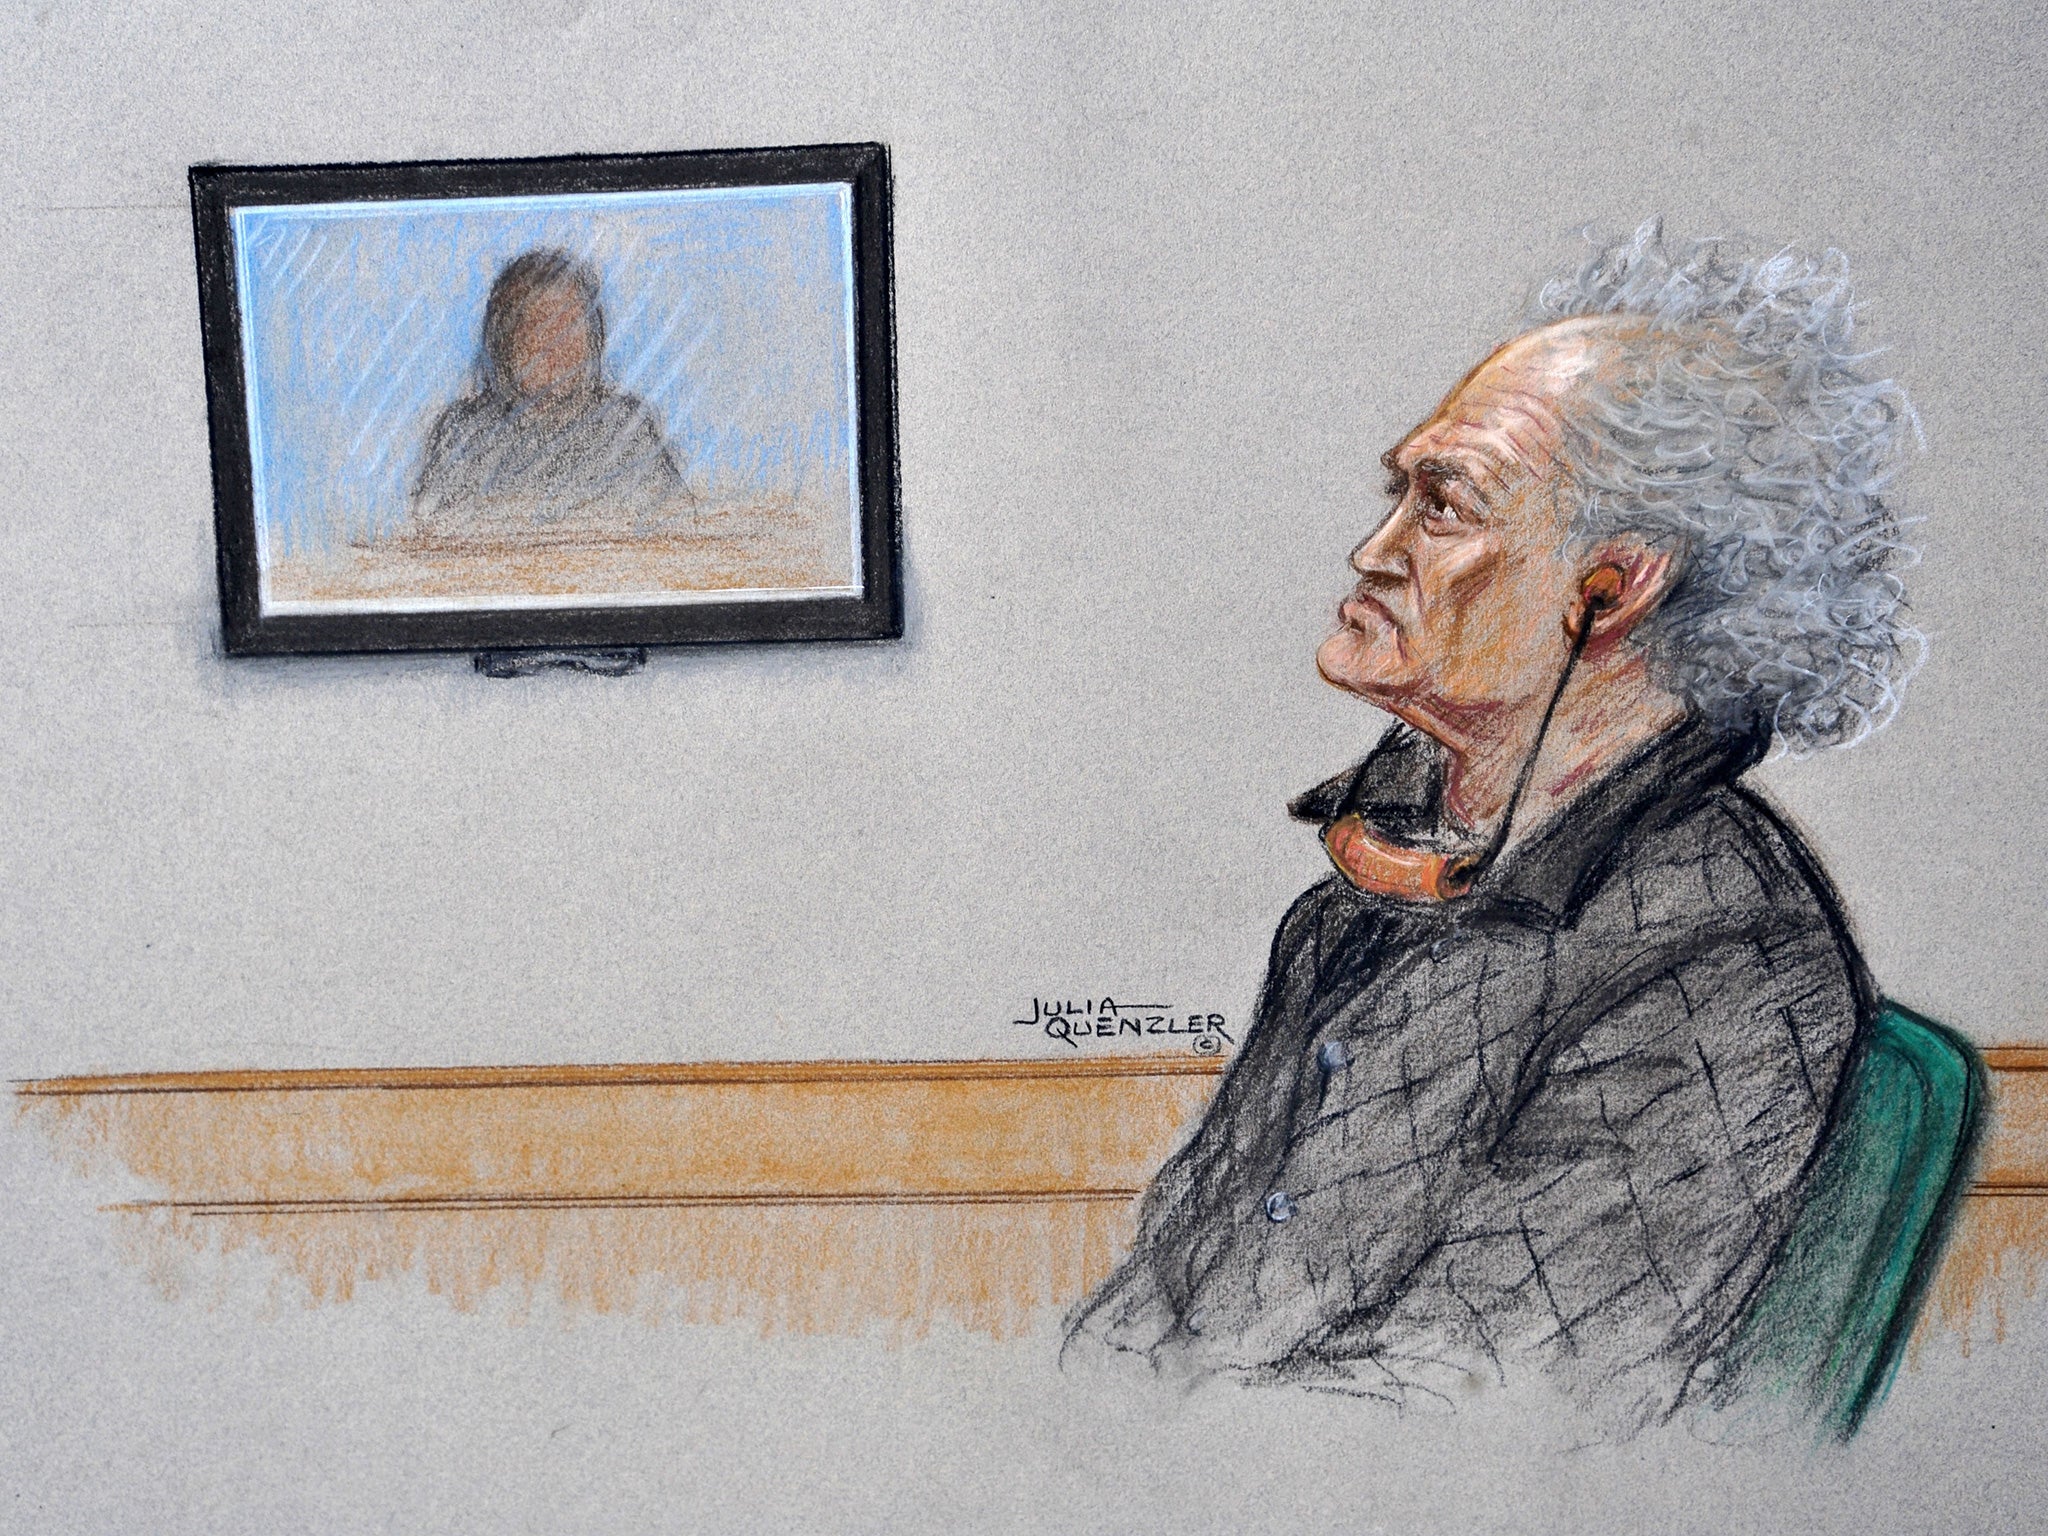 An artist’s impression of Aravindan Balakrishnan in the dock at Southwark Crown Court during his trial. His daughter is shown giving evidence by videolink